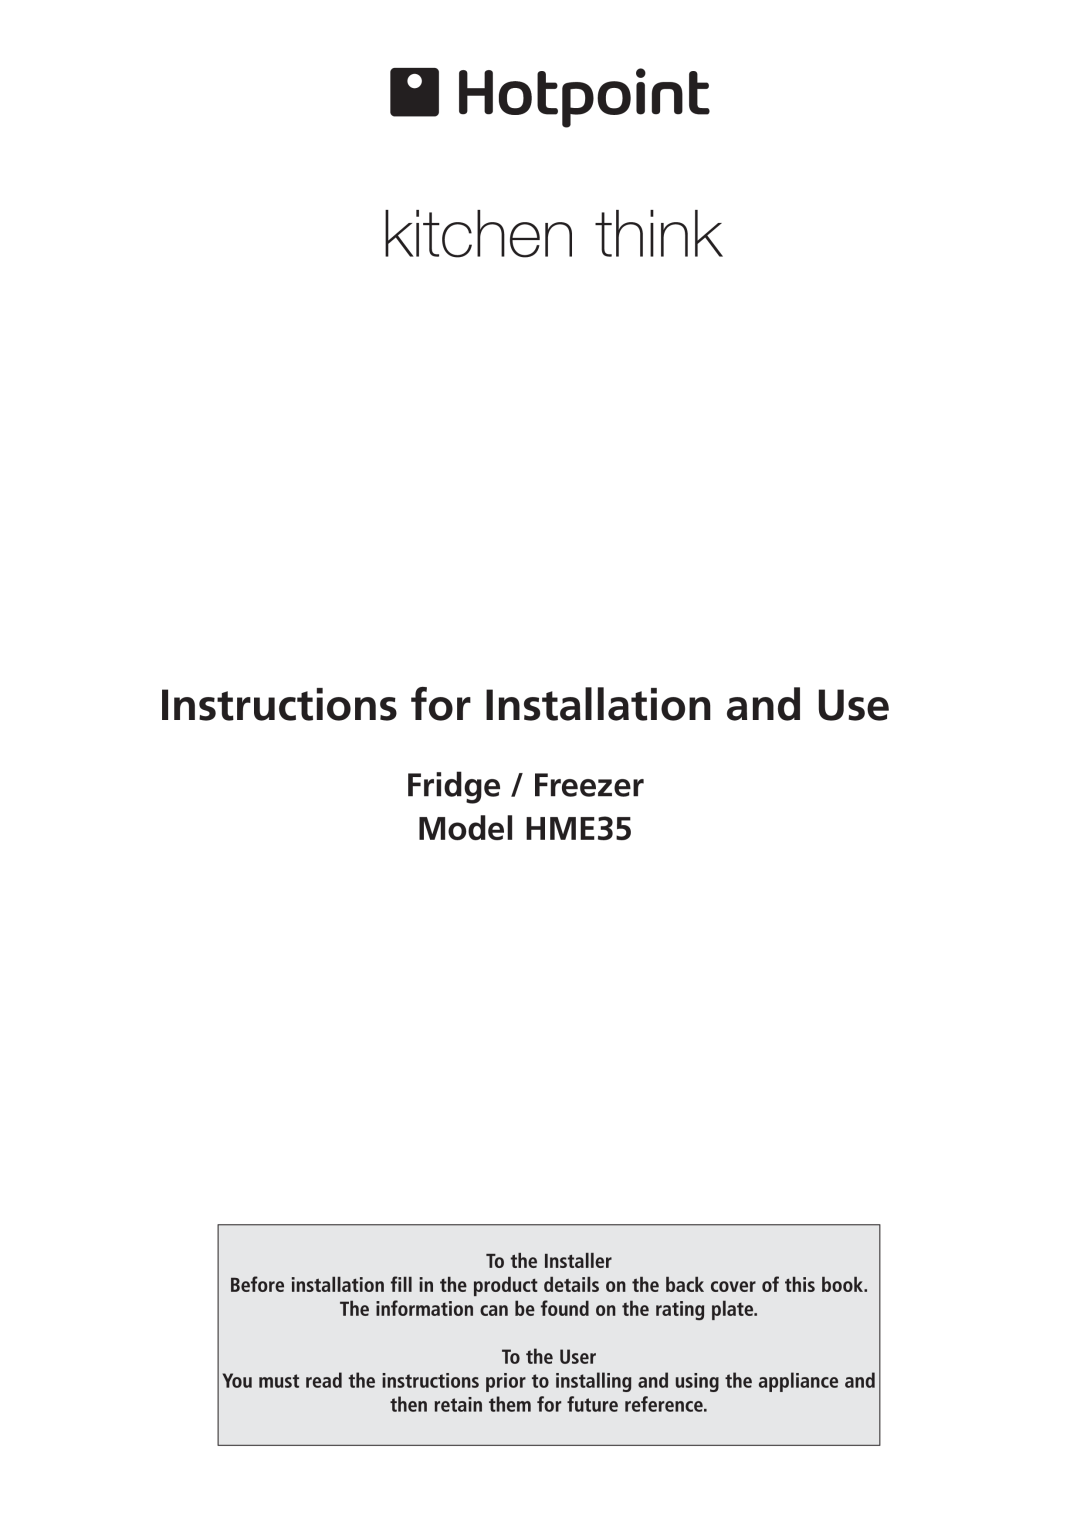 Hotpoint manual Instructions for Installation and Use, Fridge / Freezer Model HME35 